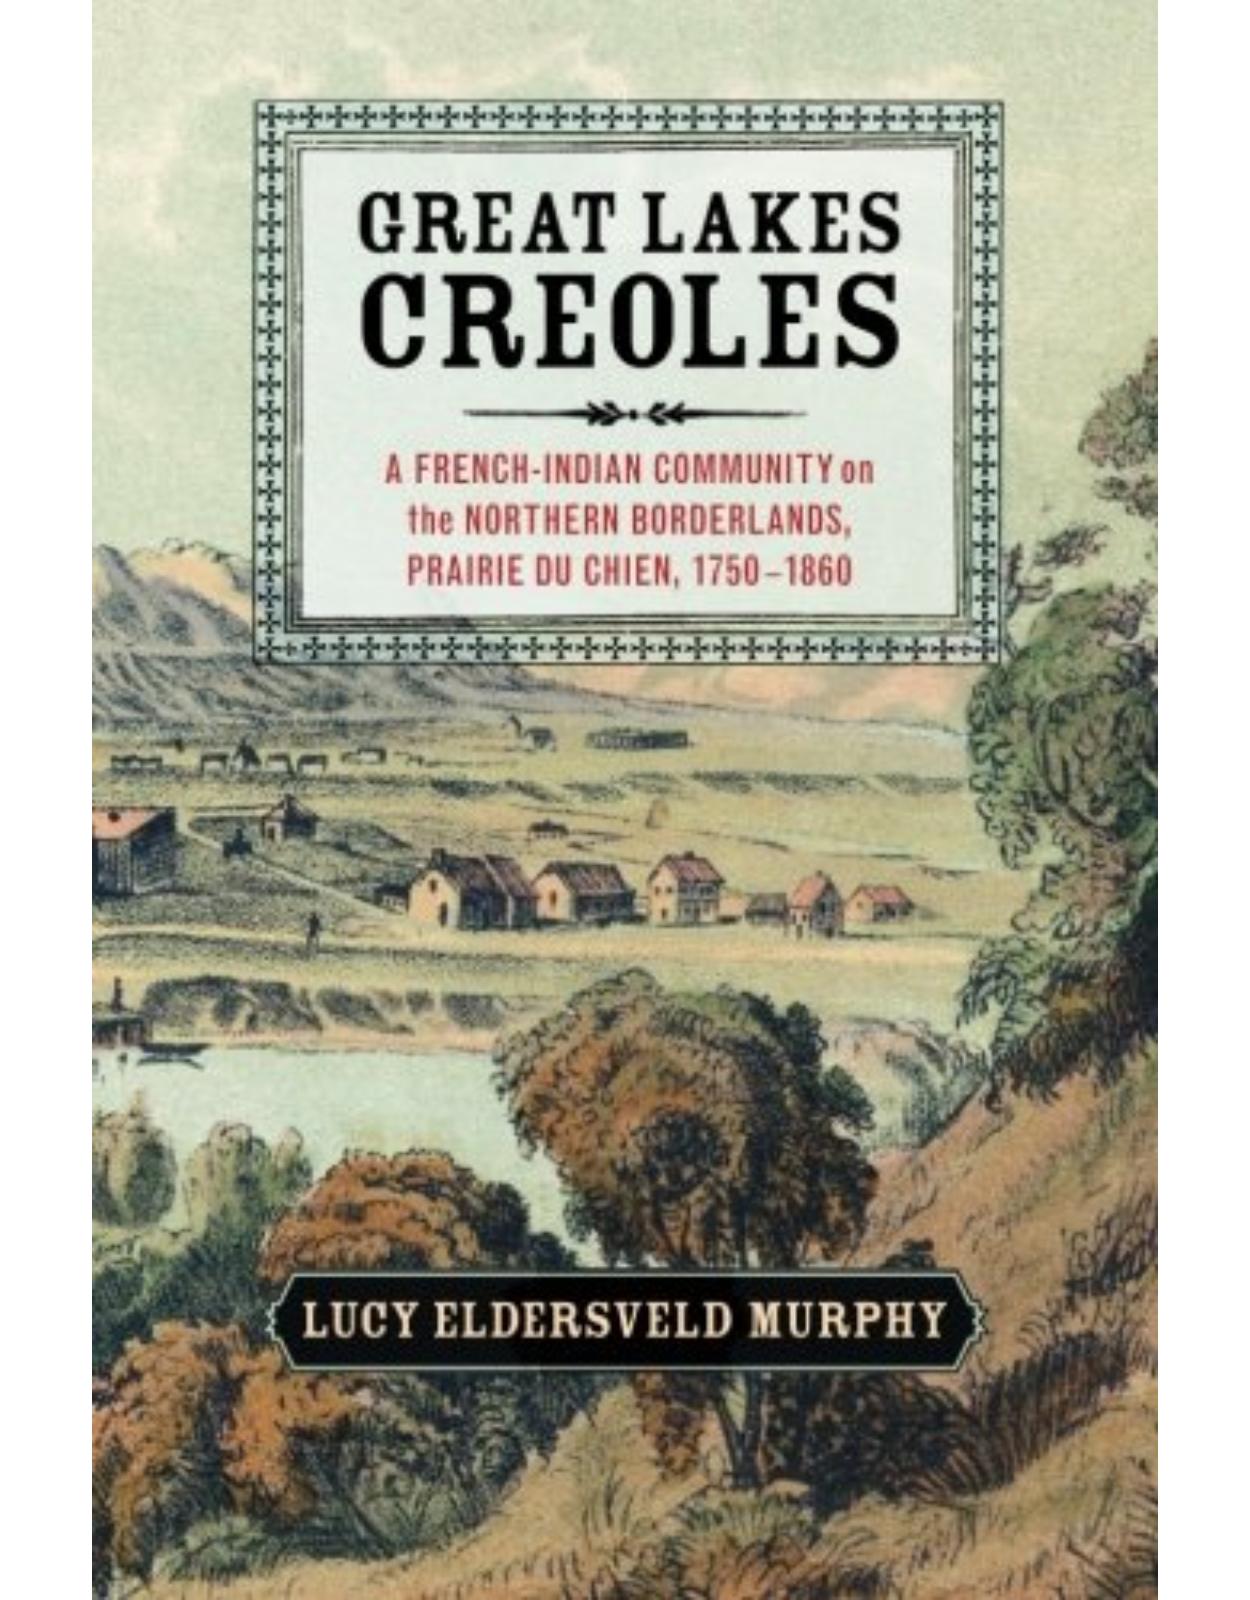 Great Lakes Creoles: A French-Indian Community on the Northern Borderlands, Prairie du Chien, 1750-1860 (Studies in North American Indian History)